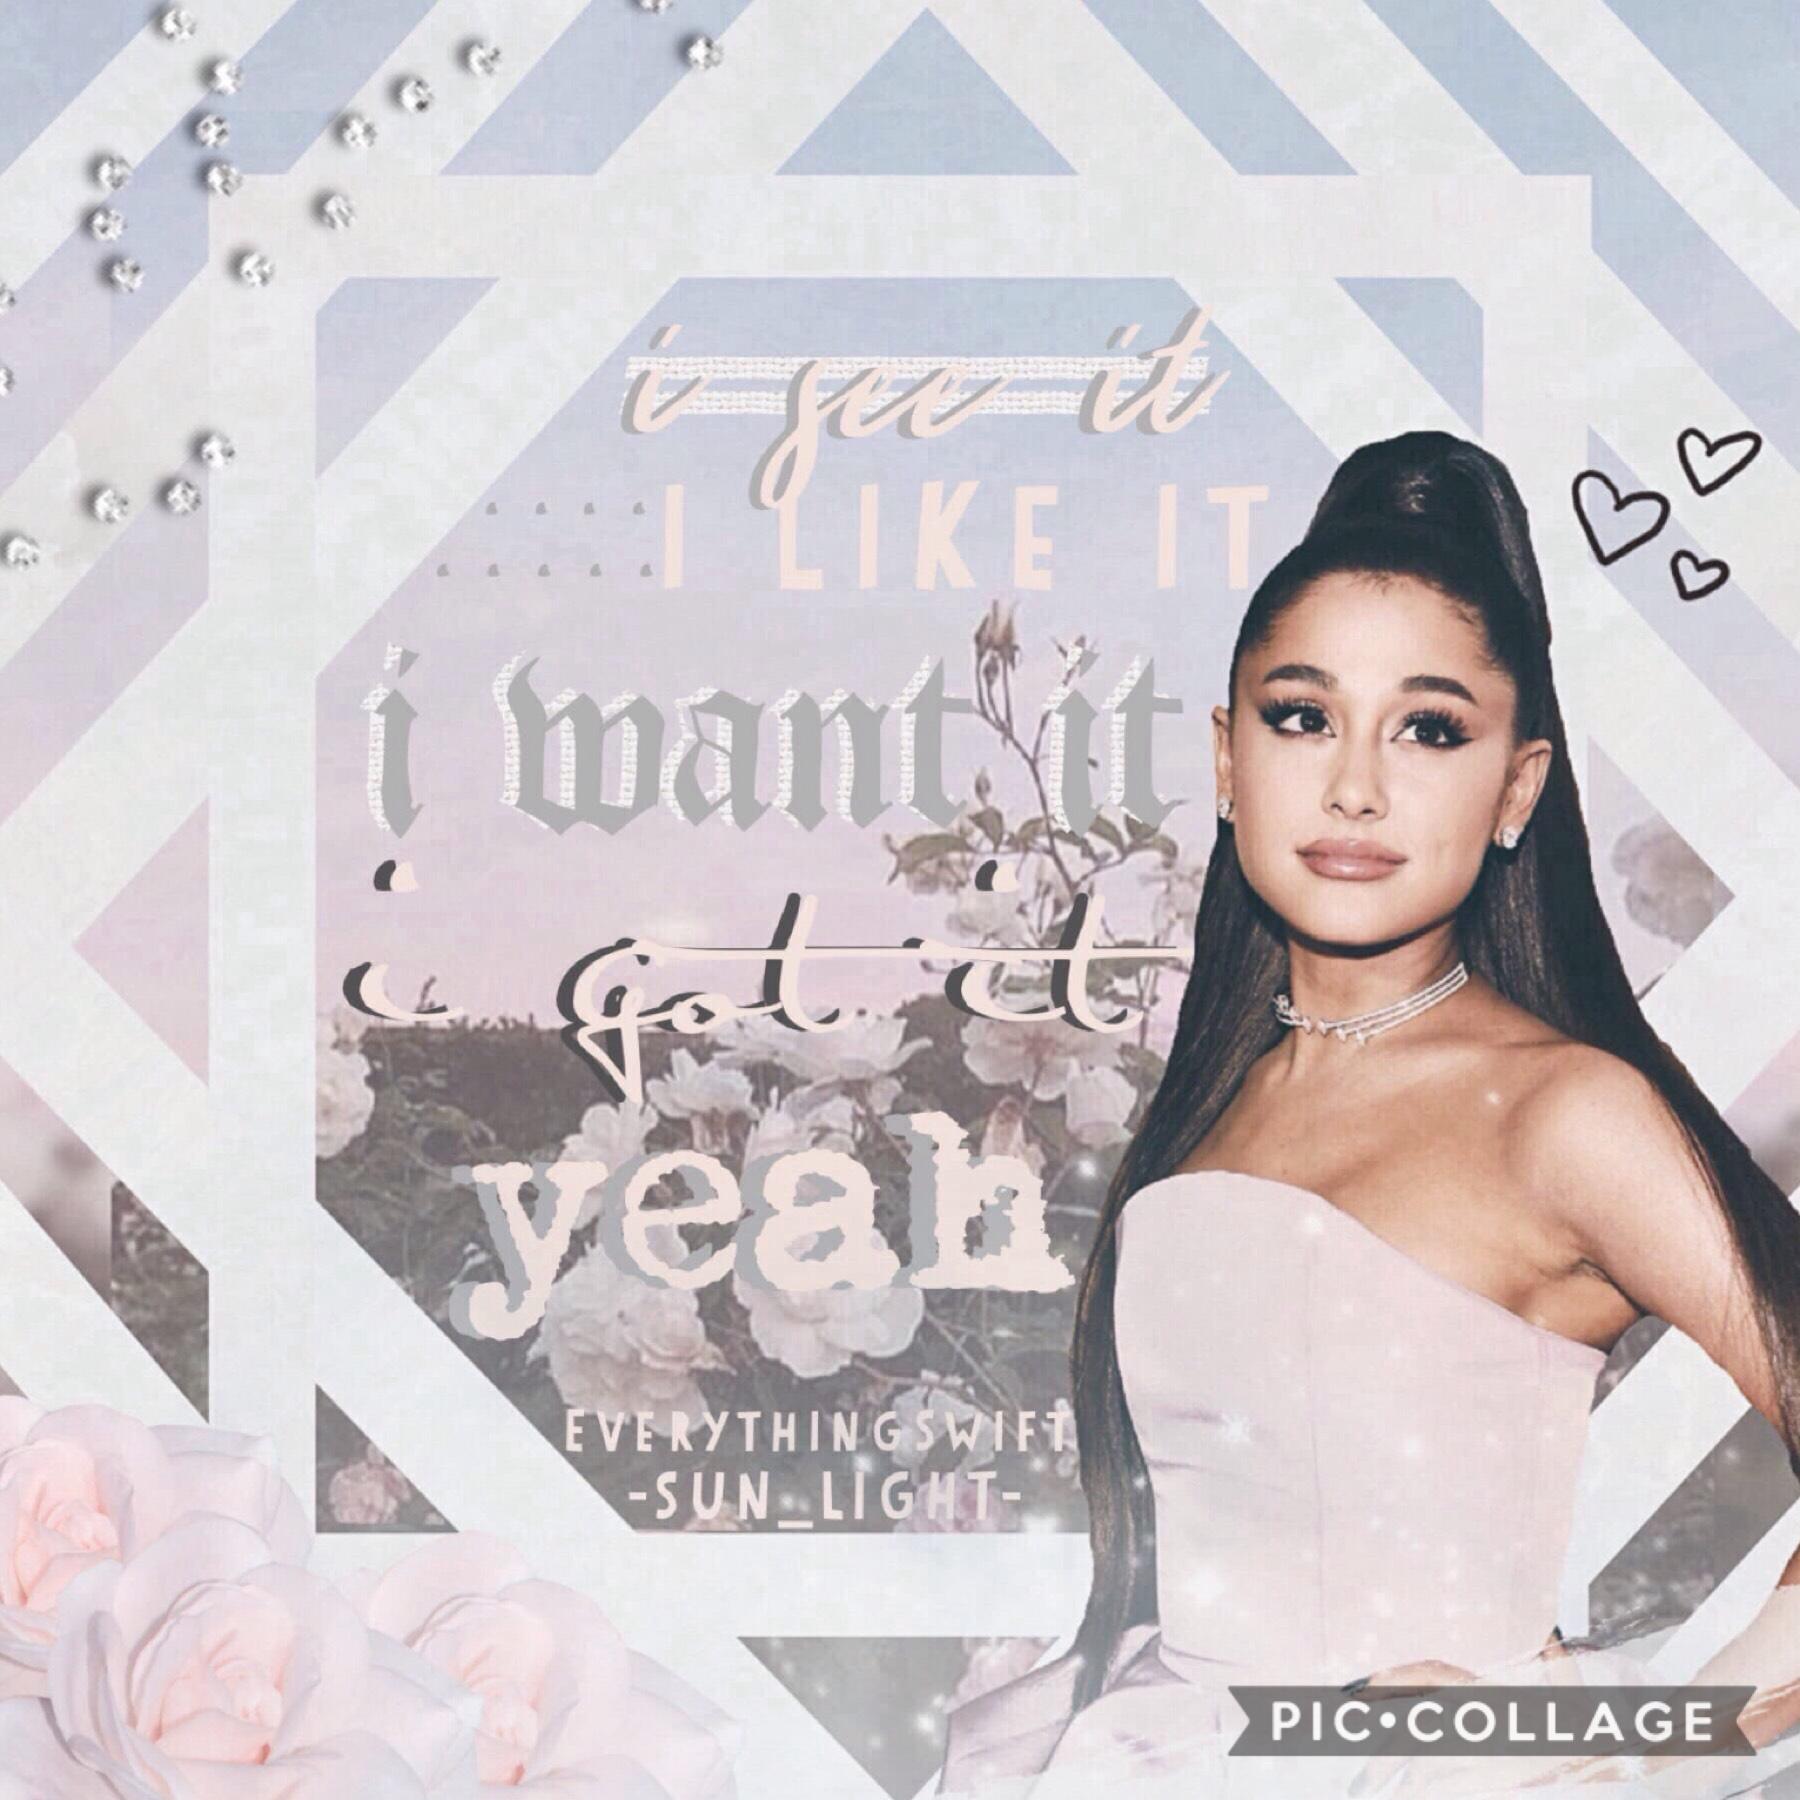 🌿an amazing collab with the truly talented @EverythingSwift!🌿she is super talented and check her out acc out!!🌈💕
I am literally listening to the whole sweetener album 24/7 and ari’s new song is amazing!! wow...such a fangirl😂💖
new post coming soon!...be r